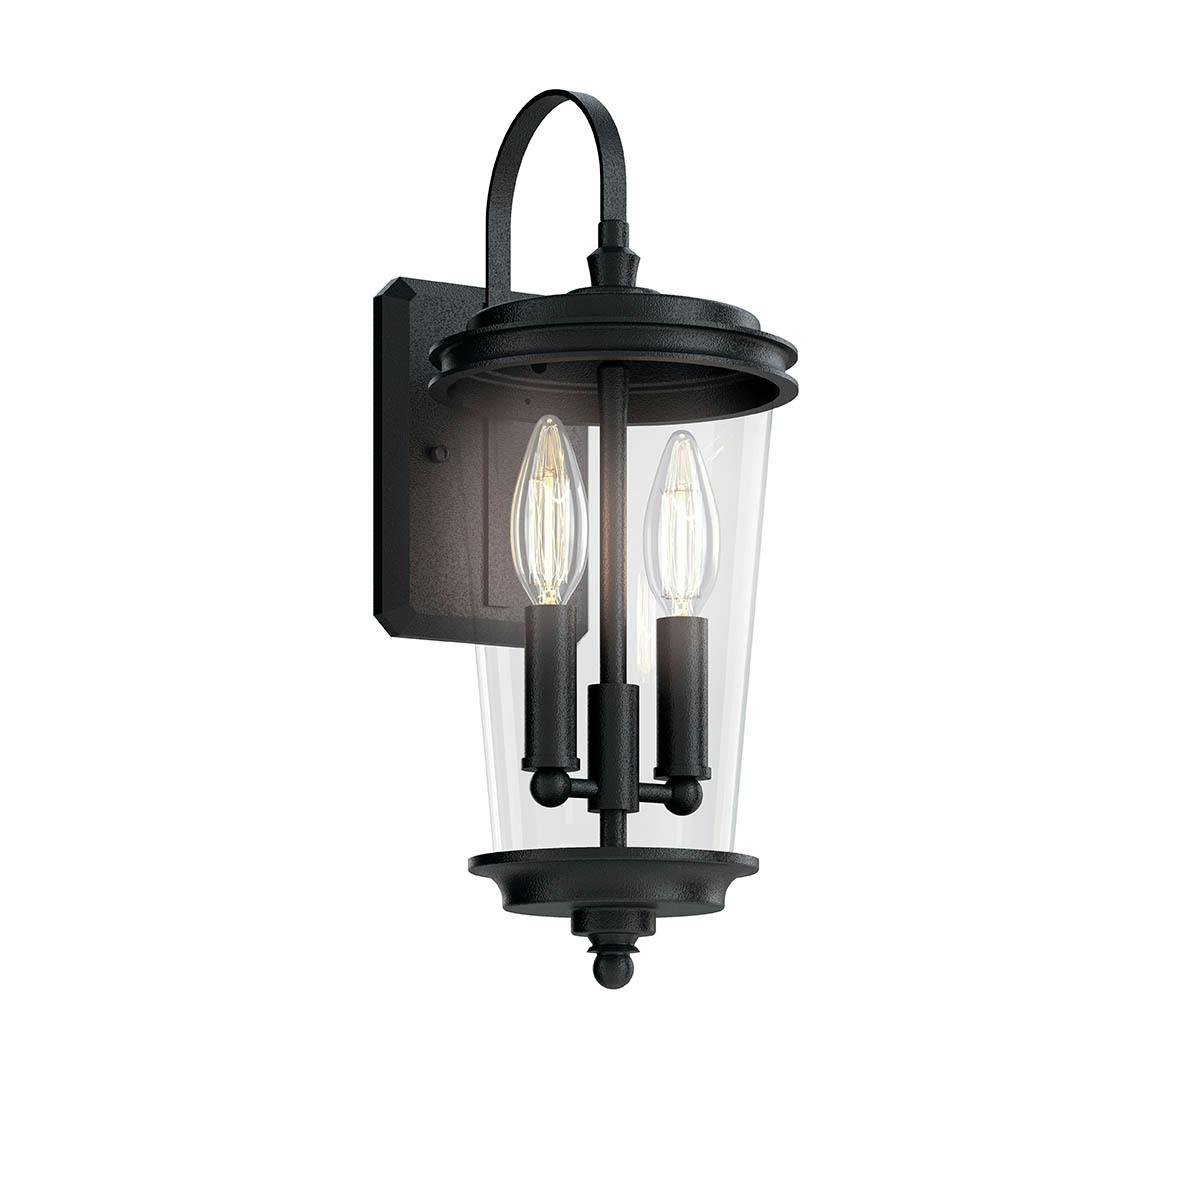 The Holmden 17" 2 Light Outdoor Wall Light Textured Black on a white background